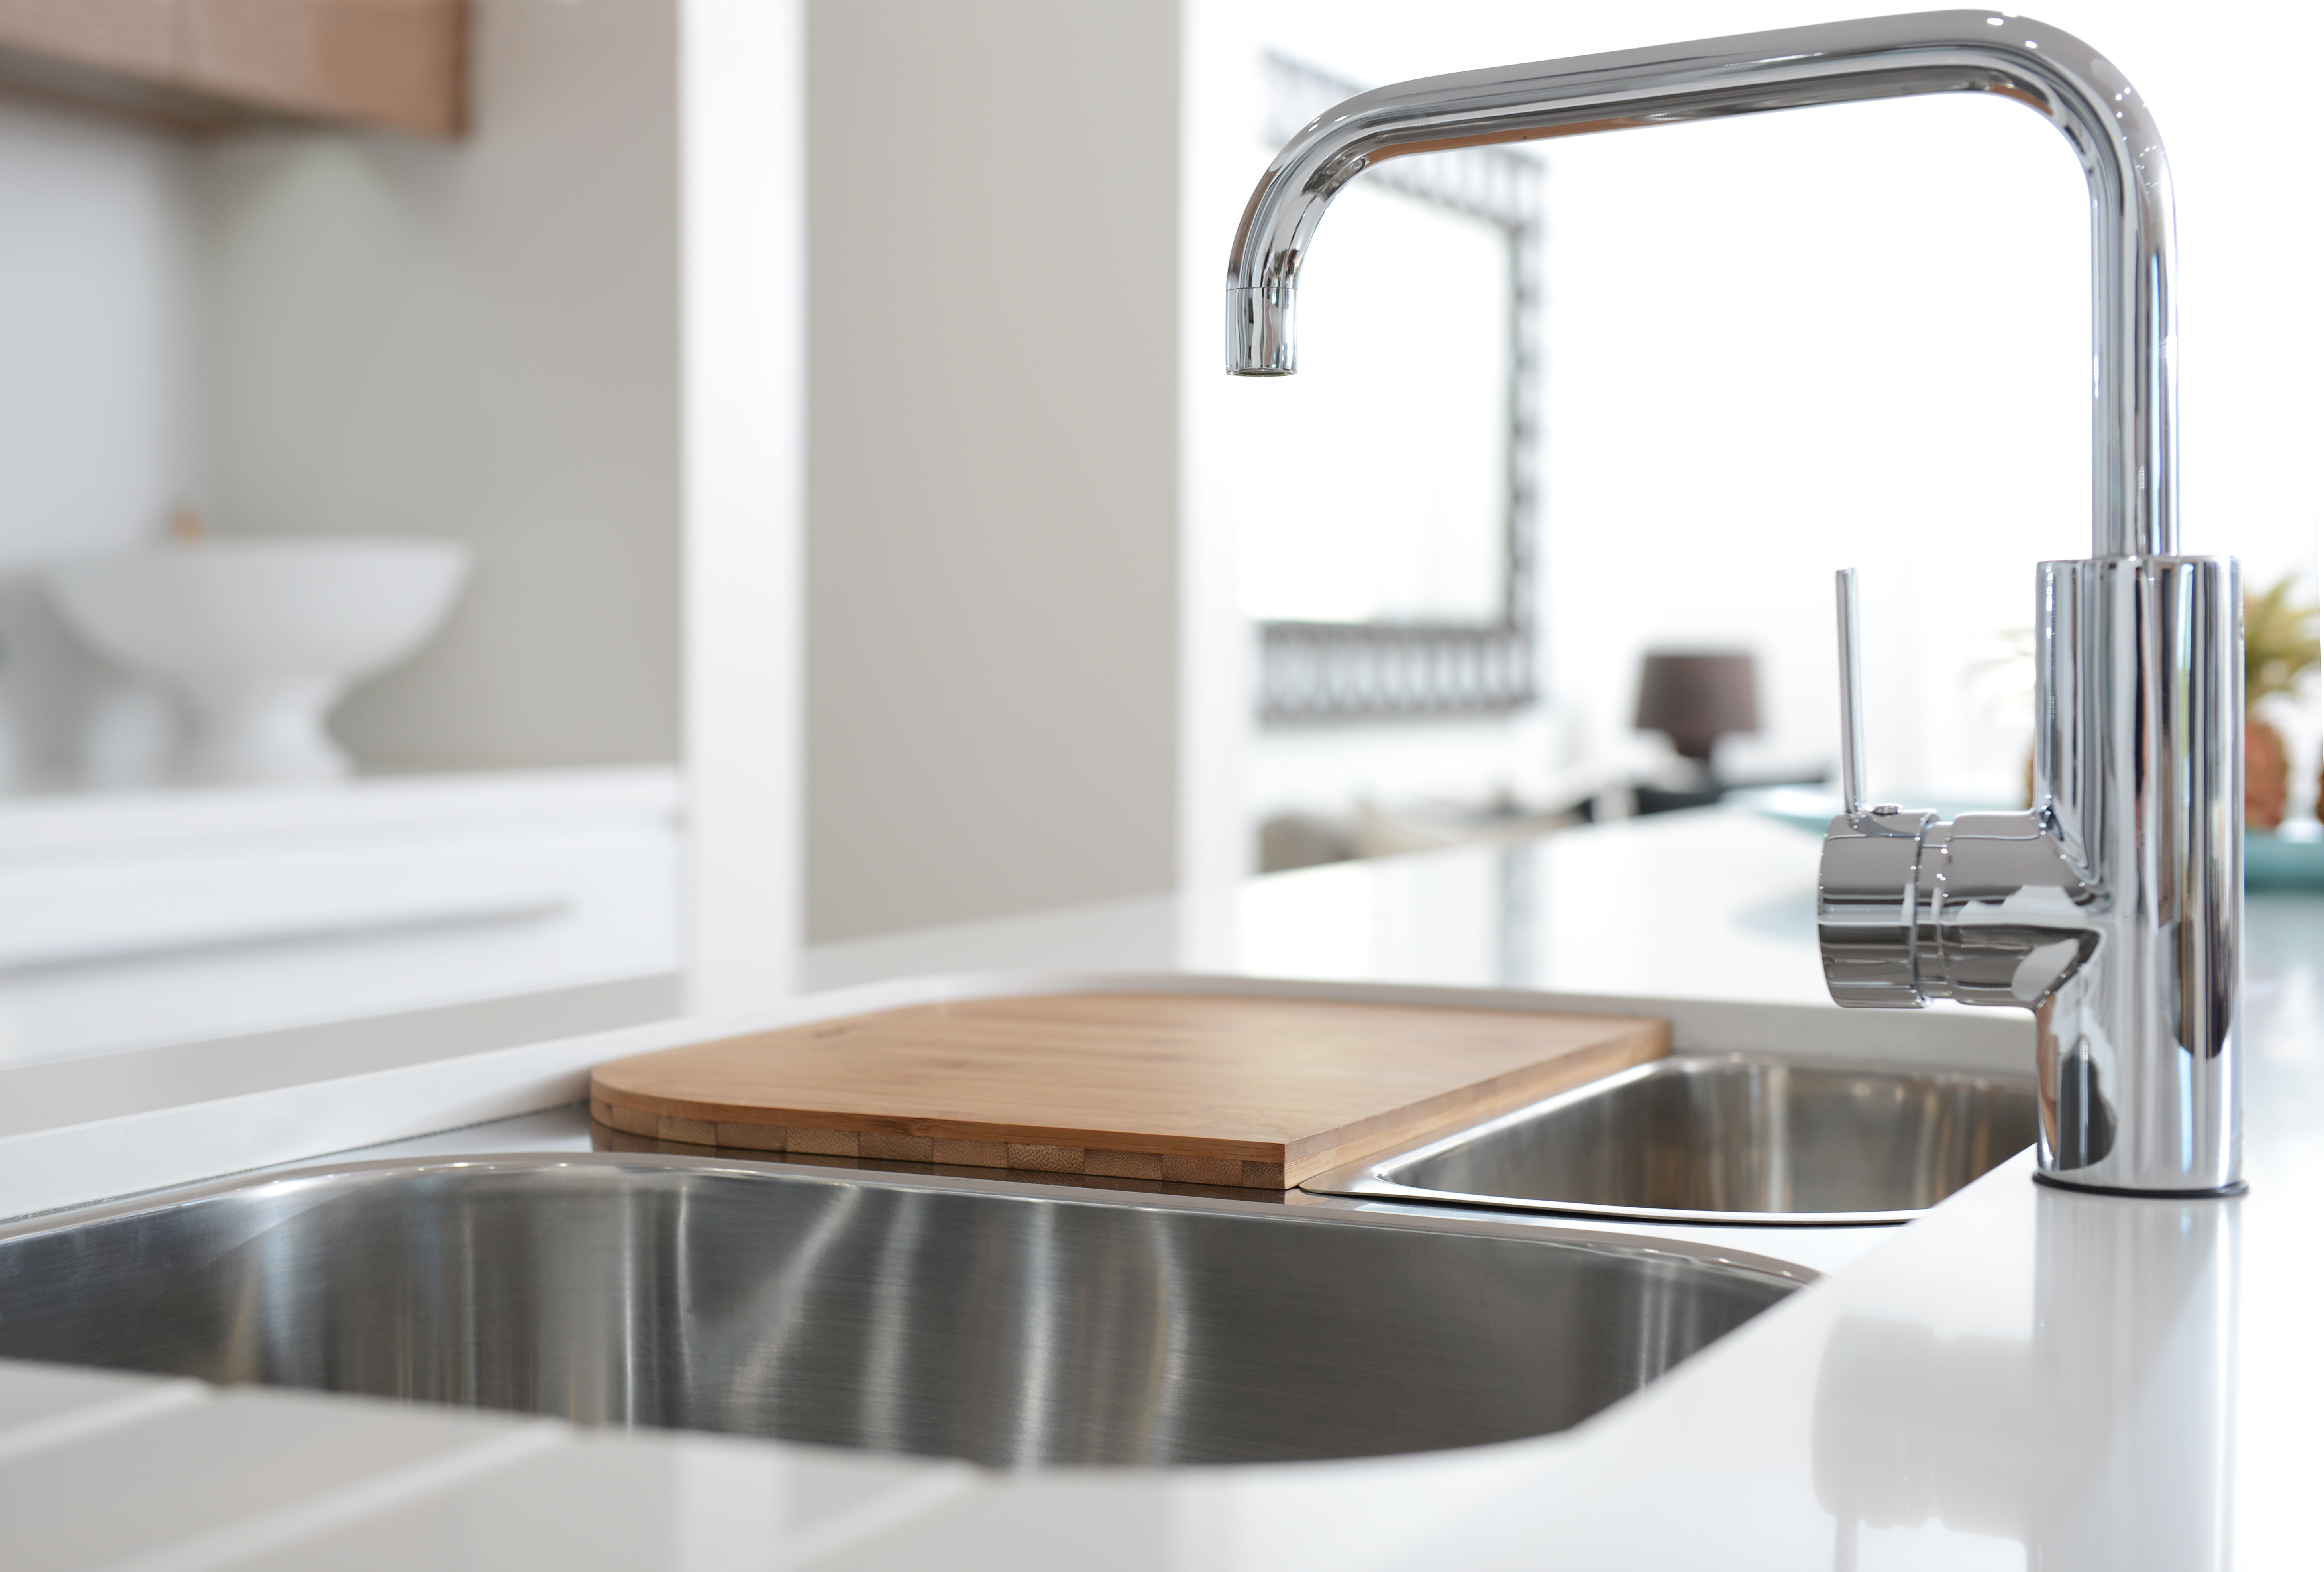 How To Refurbish A Stainless Steel Sink